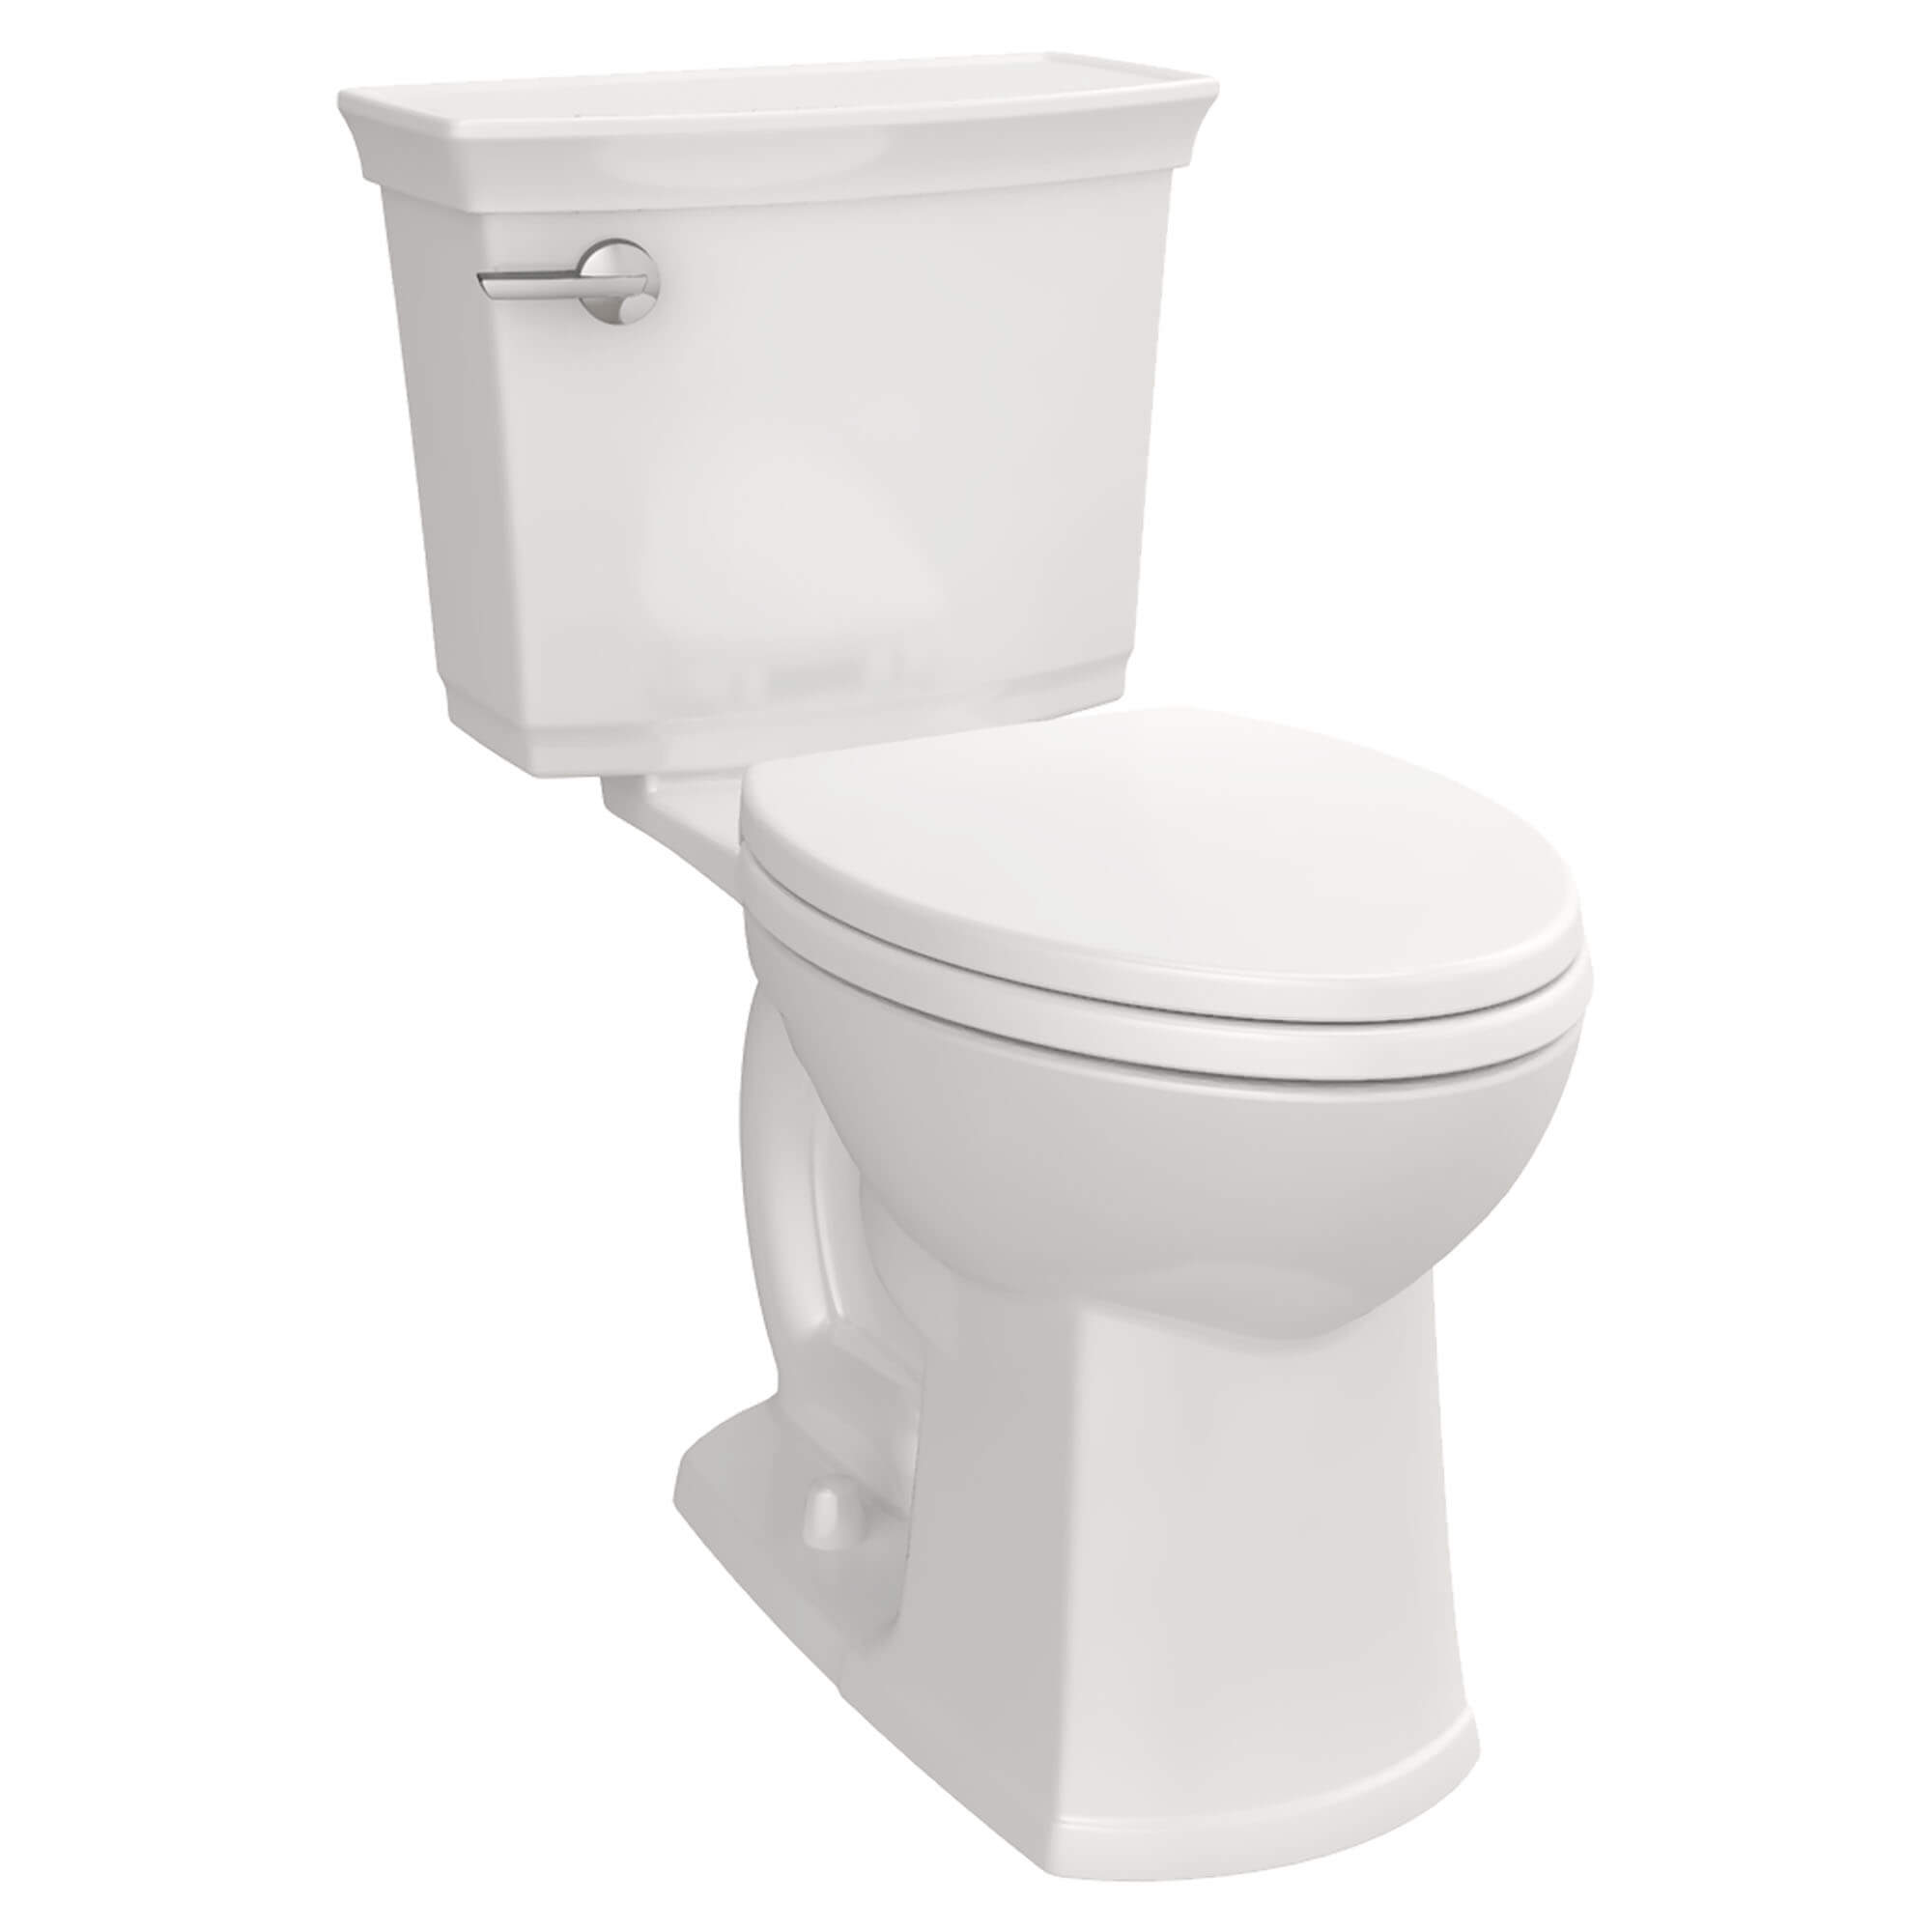 Wyatt® Toilet Tank Only with Left-Hand Trip Lever